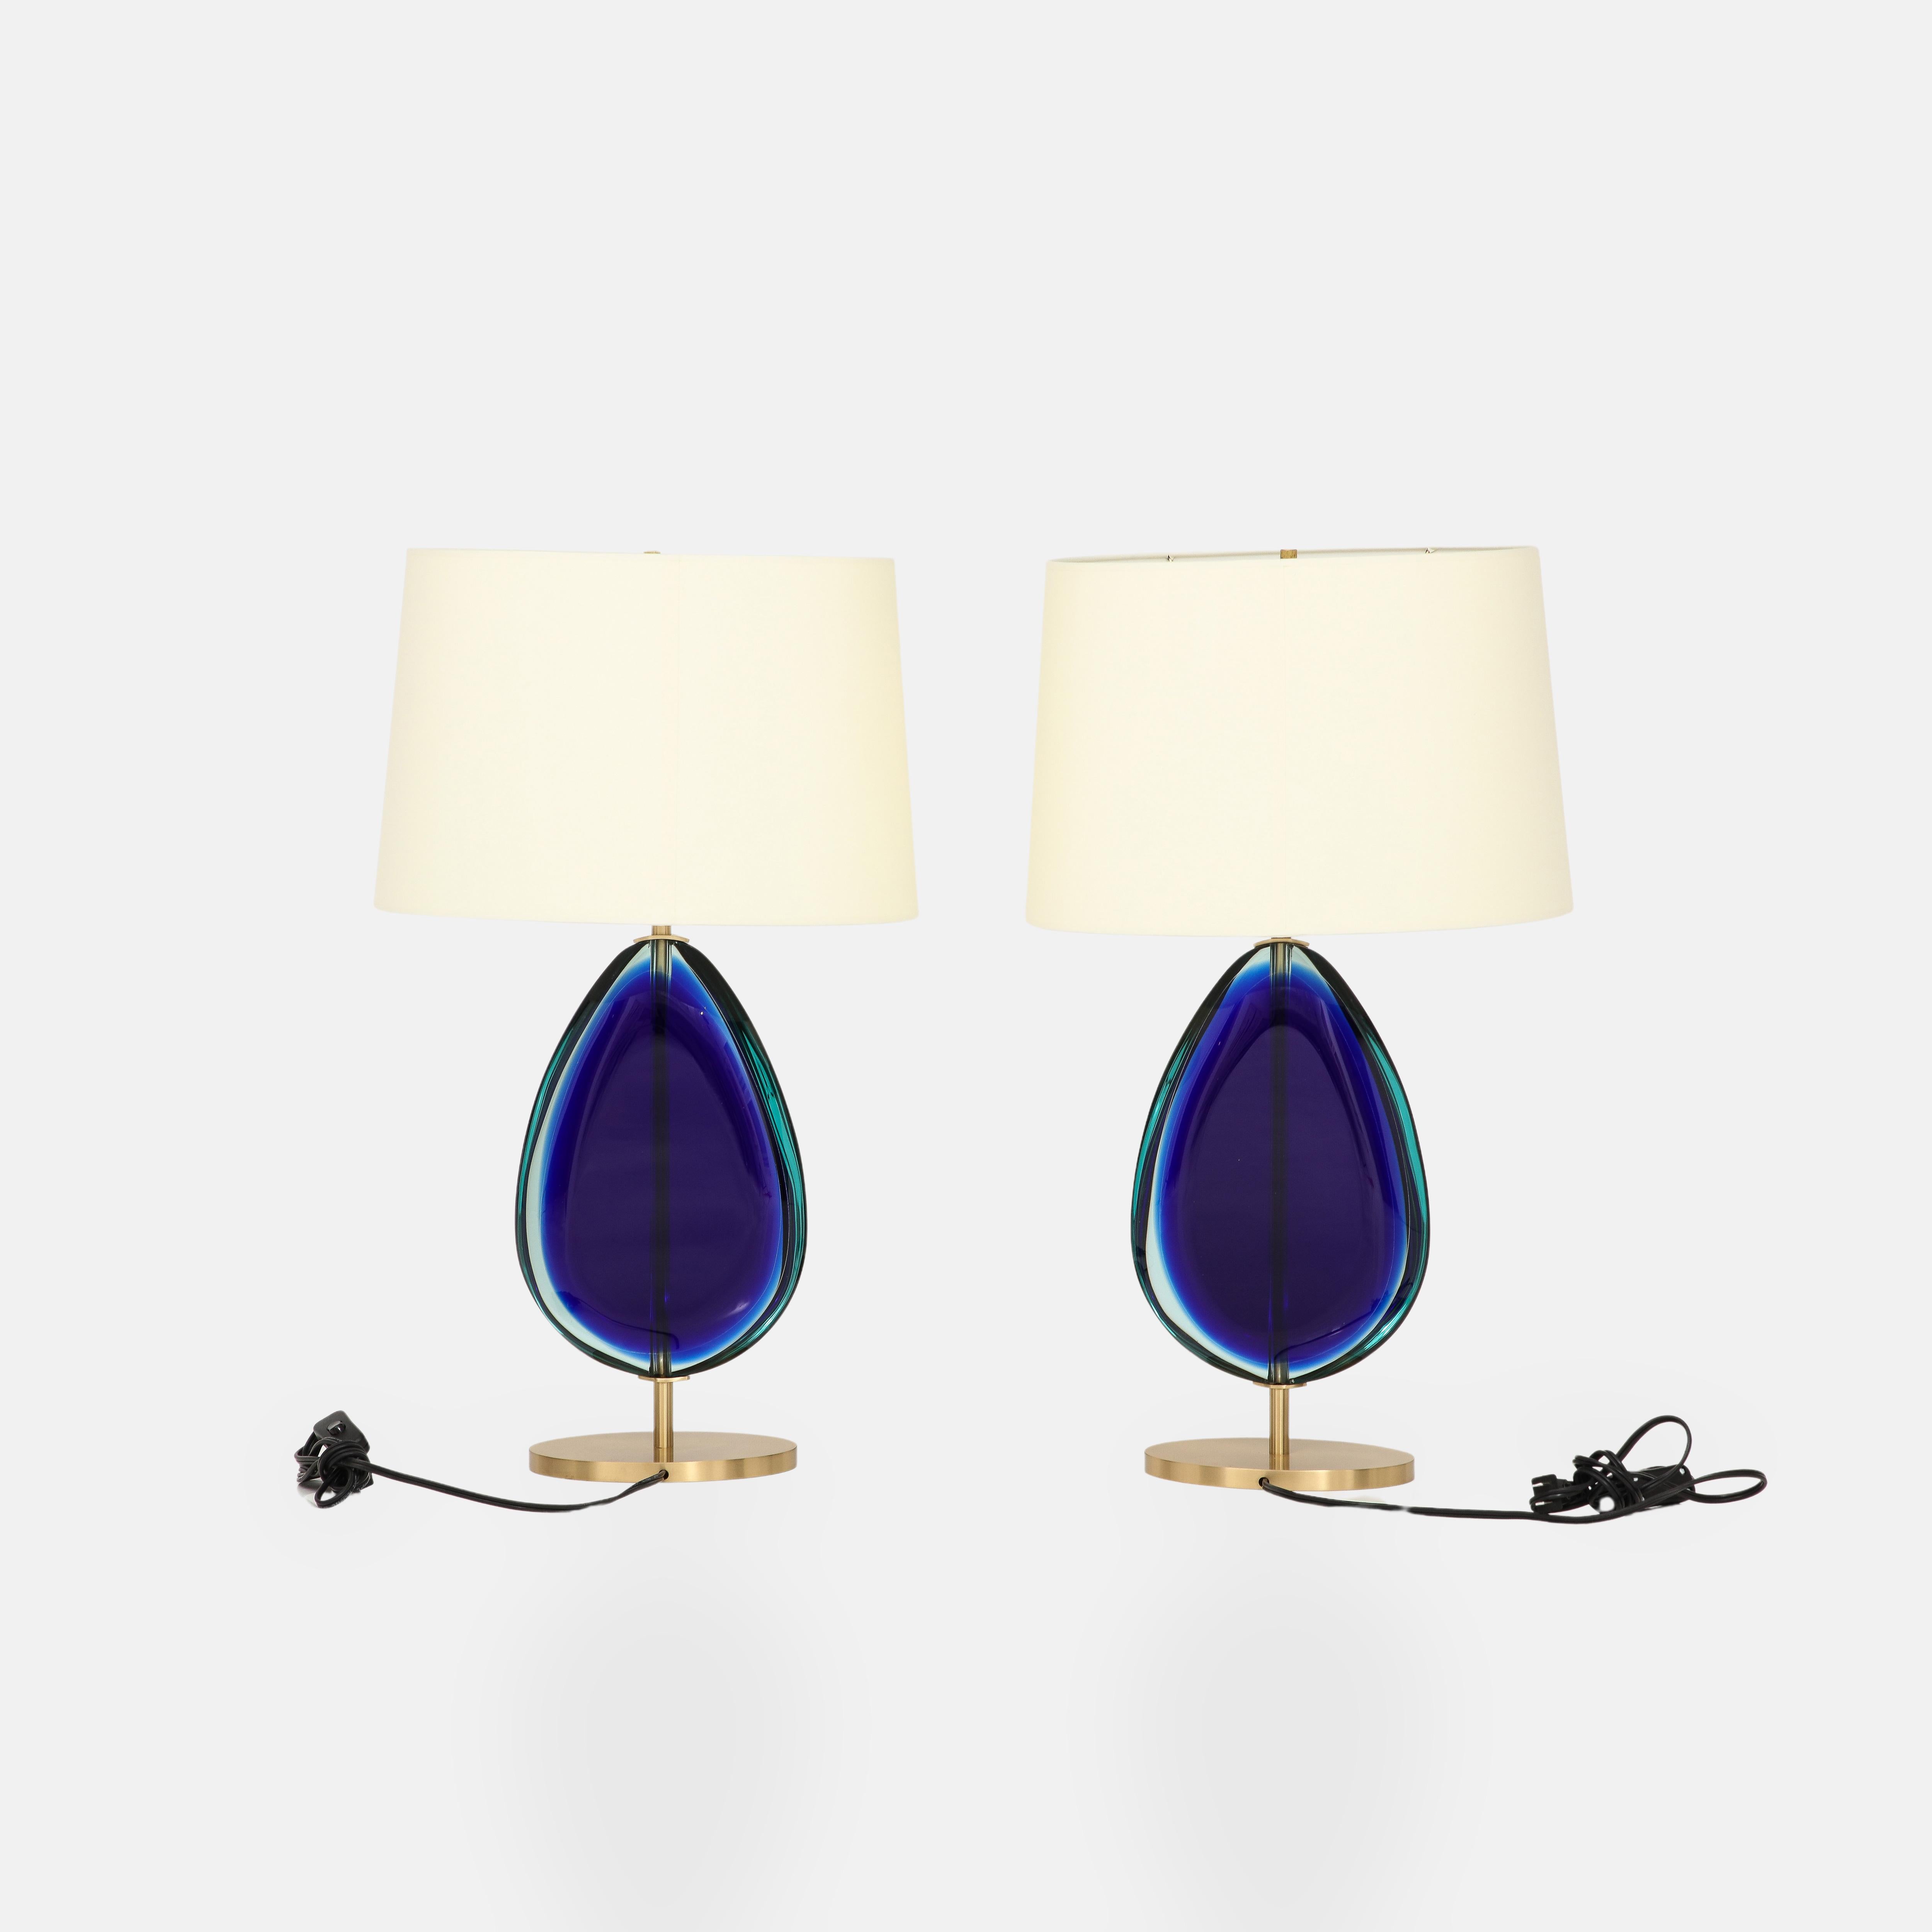 Italian Effetto Vetro Contemporary Pair of Blue Glass and Brass Table Lamps For Sale